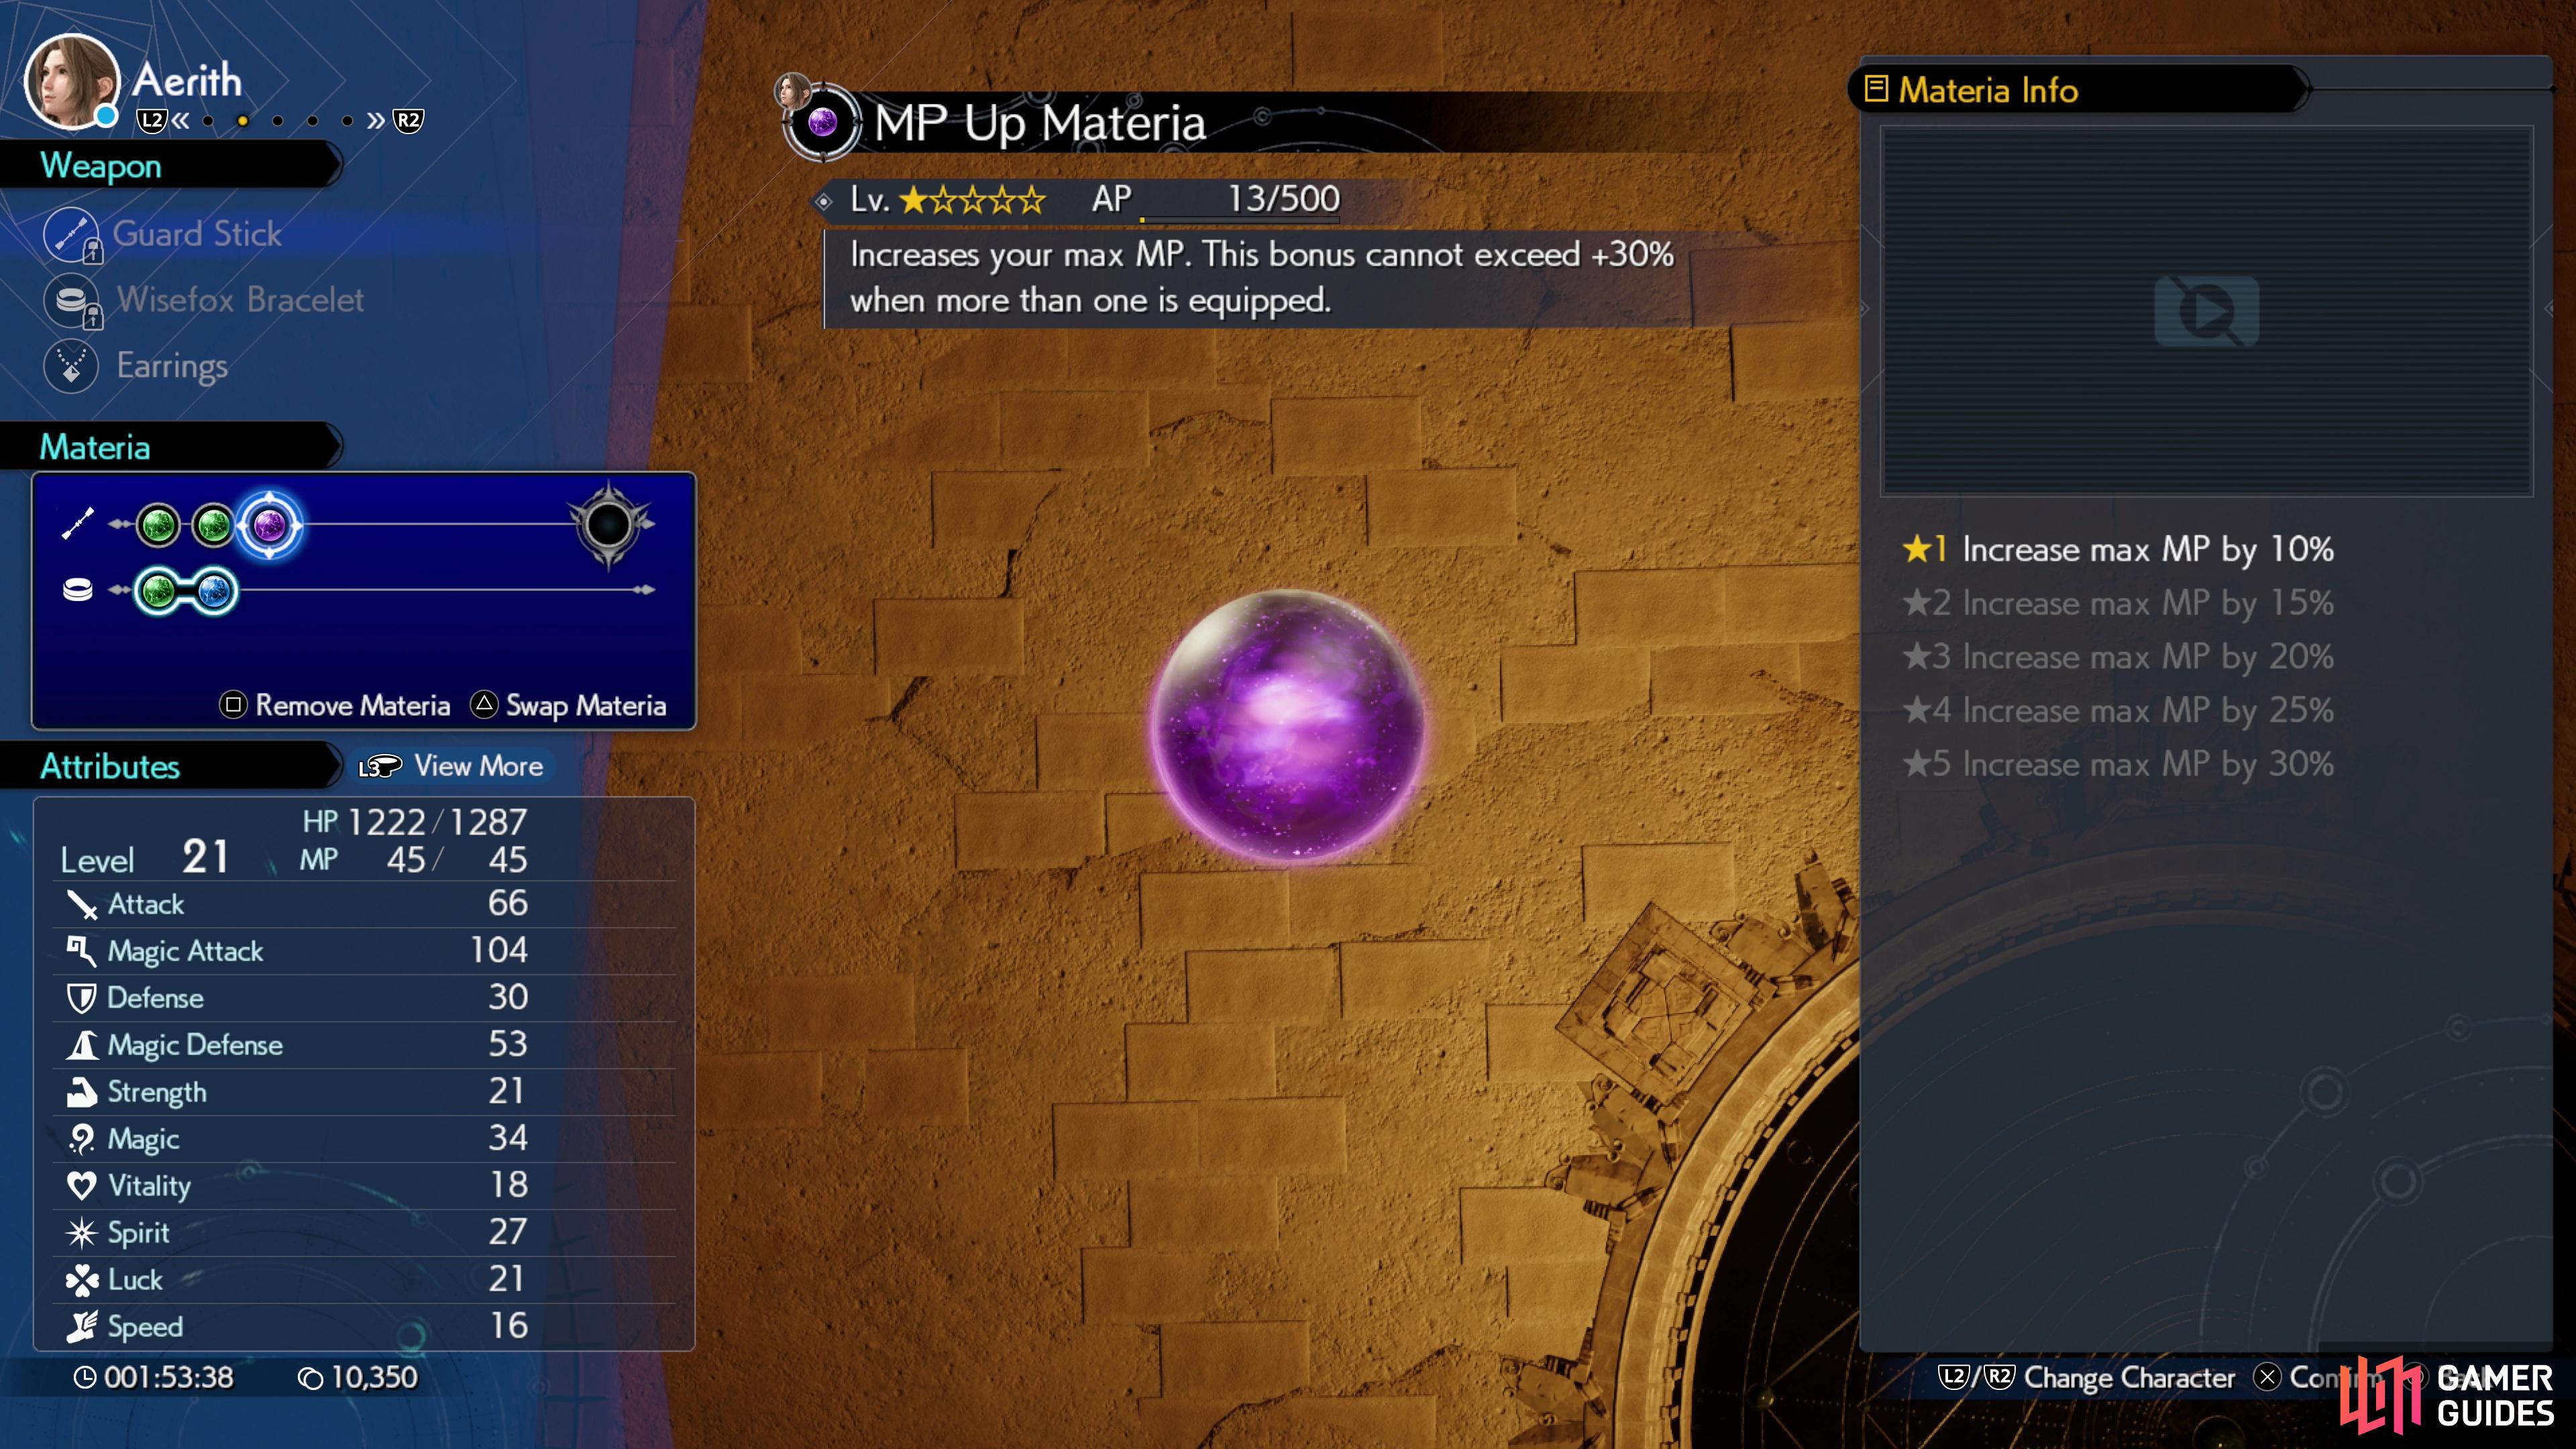 Complete materia (purple) is a loose collection of stat-buffing materia, companion automation materia, and materia that modifys core gameplay mechanics.